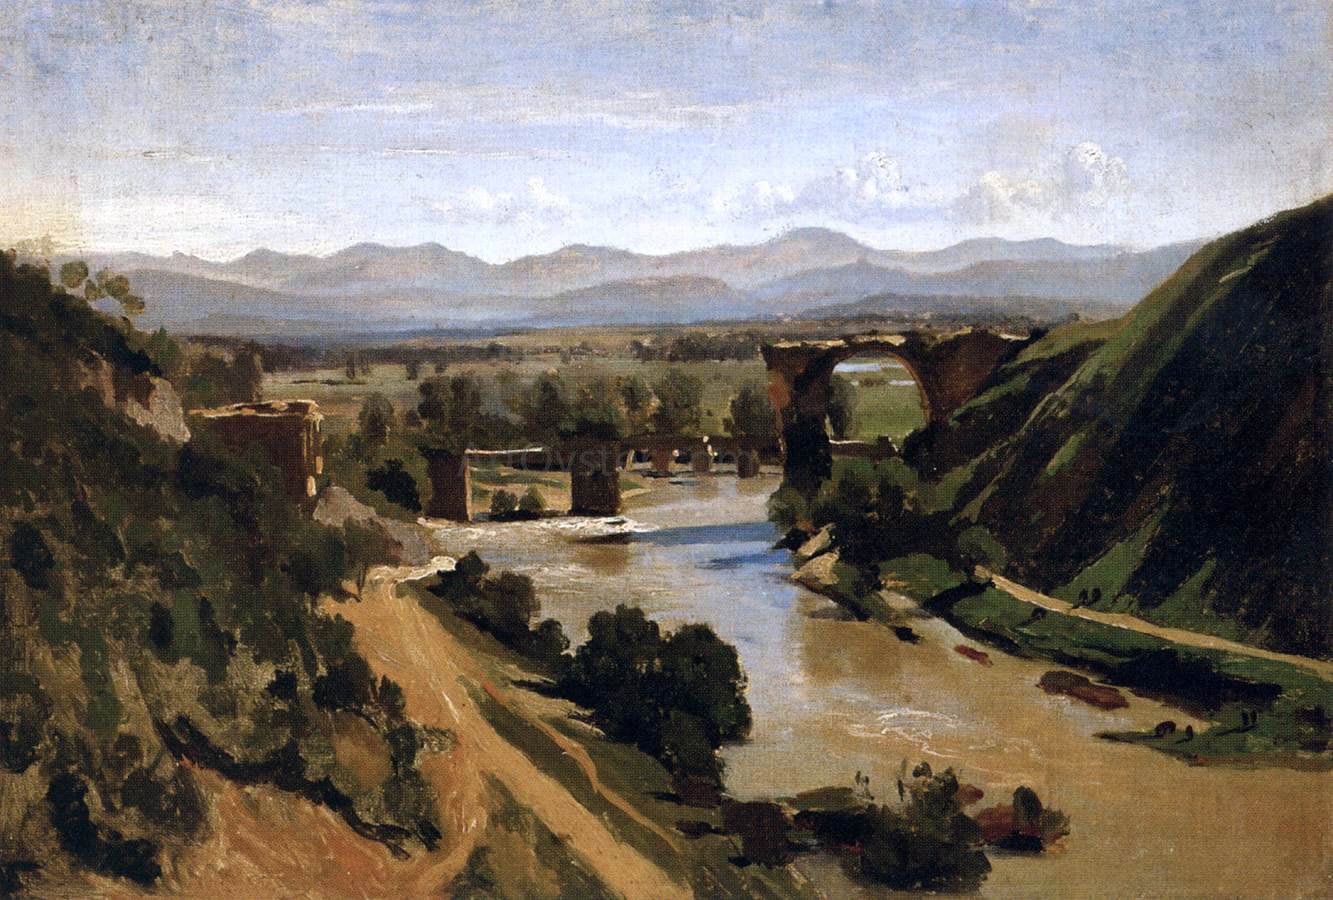  Jean-Baptiste-Camille Corot The Bridge of Narni - Hand Painted Oil Painting